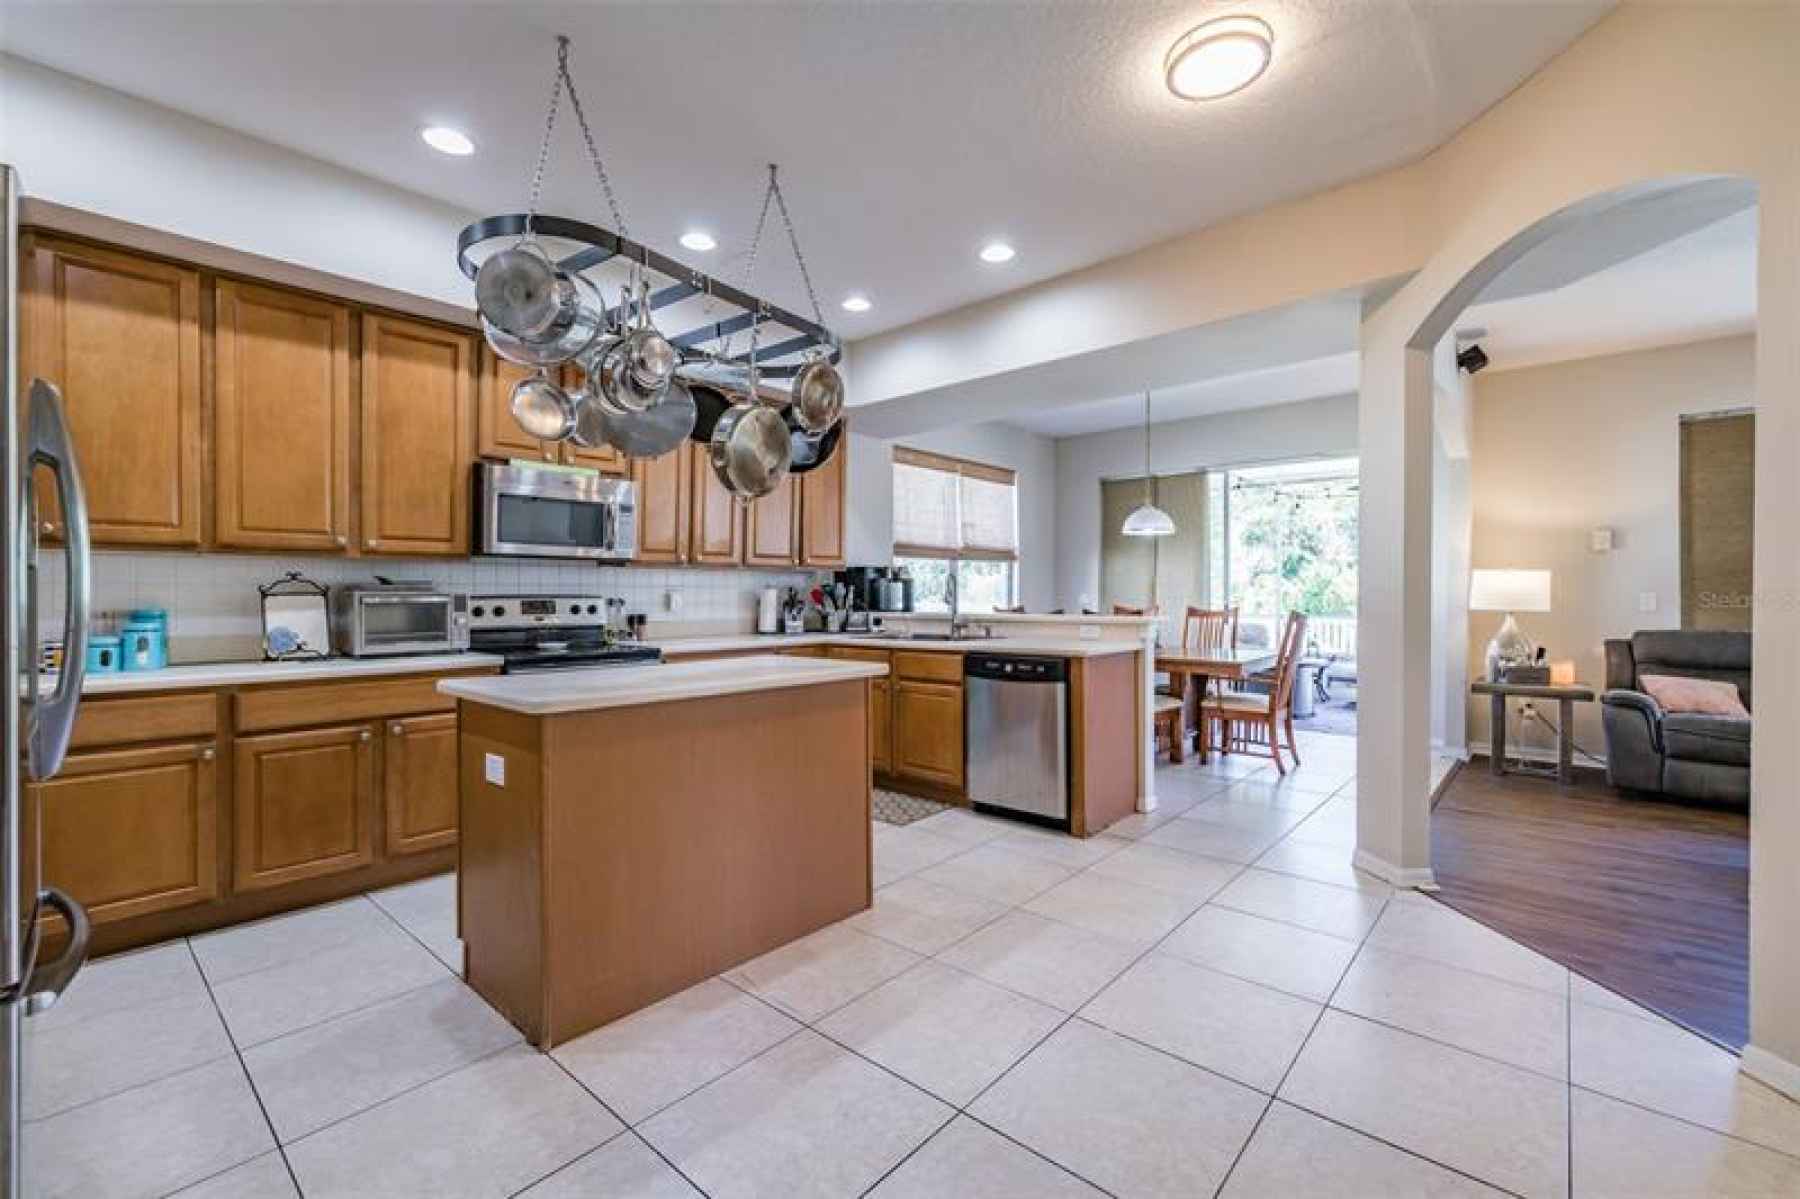 Spacious kitchen with island and pot rack